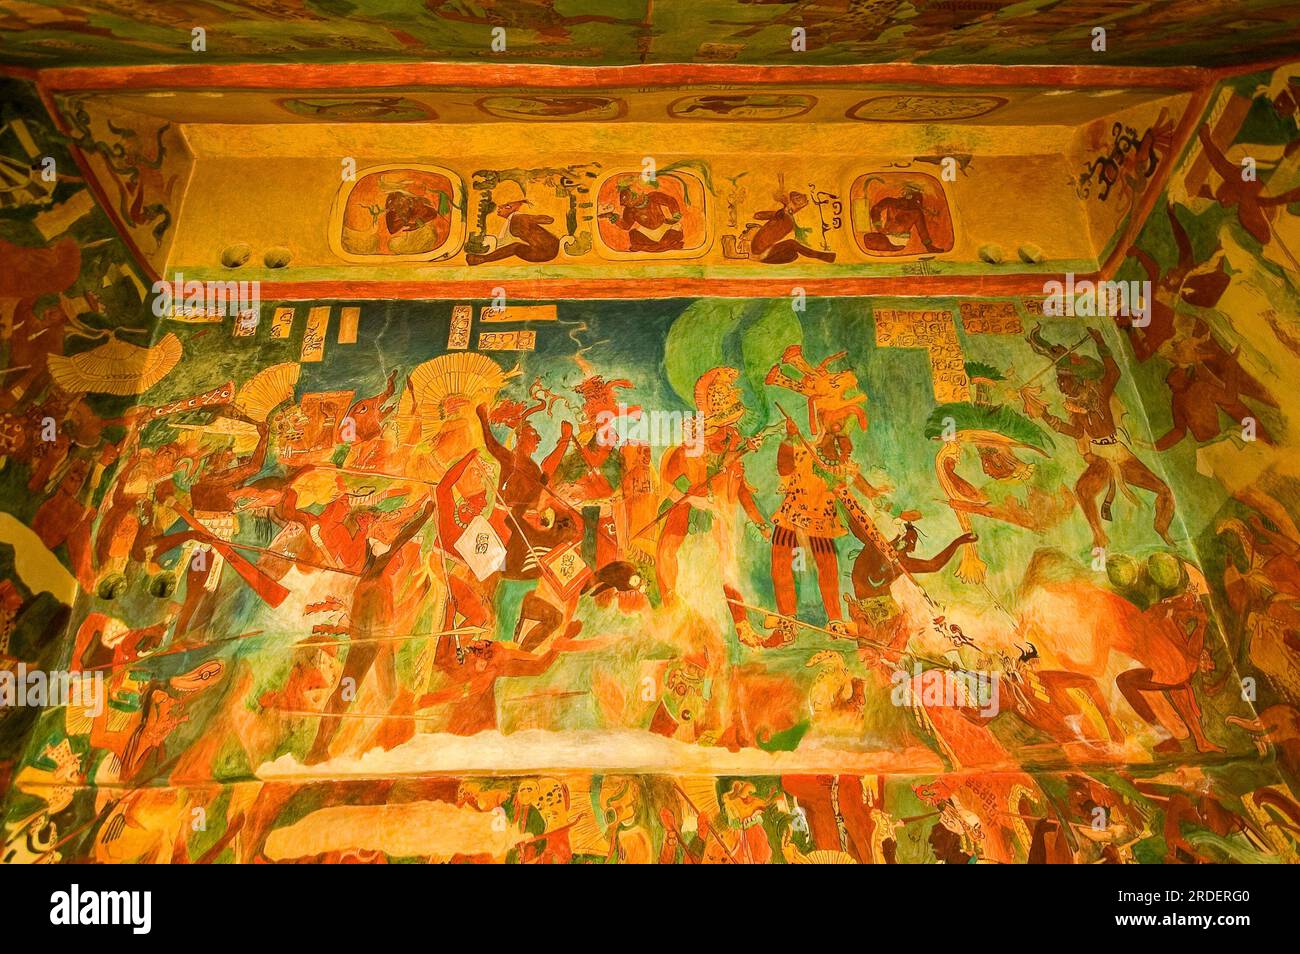 Wall decorated with frescoes in room nº.2.Maya.Original mural painting by Bonampak. Museo Nacional de Antropologia. State of Mexico D.F. Mexico. Stock Photo